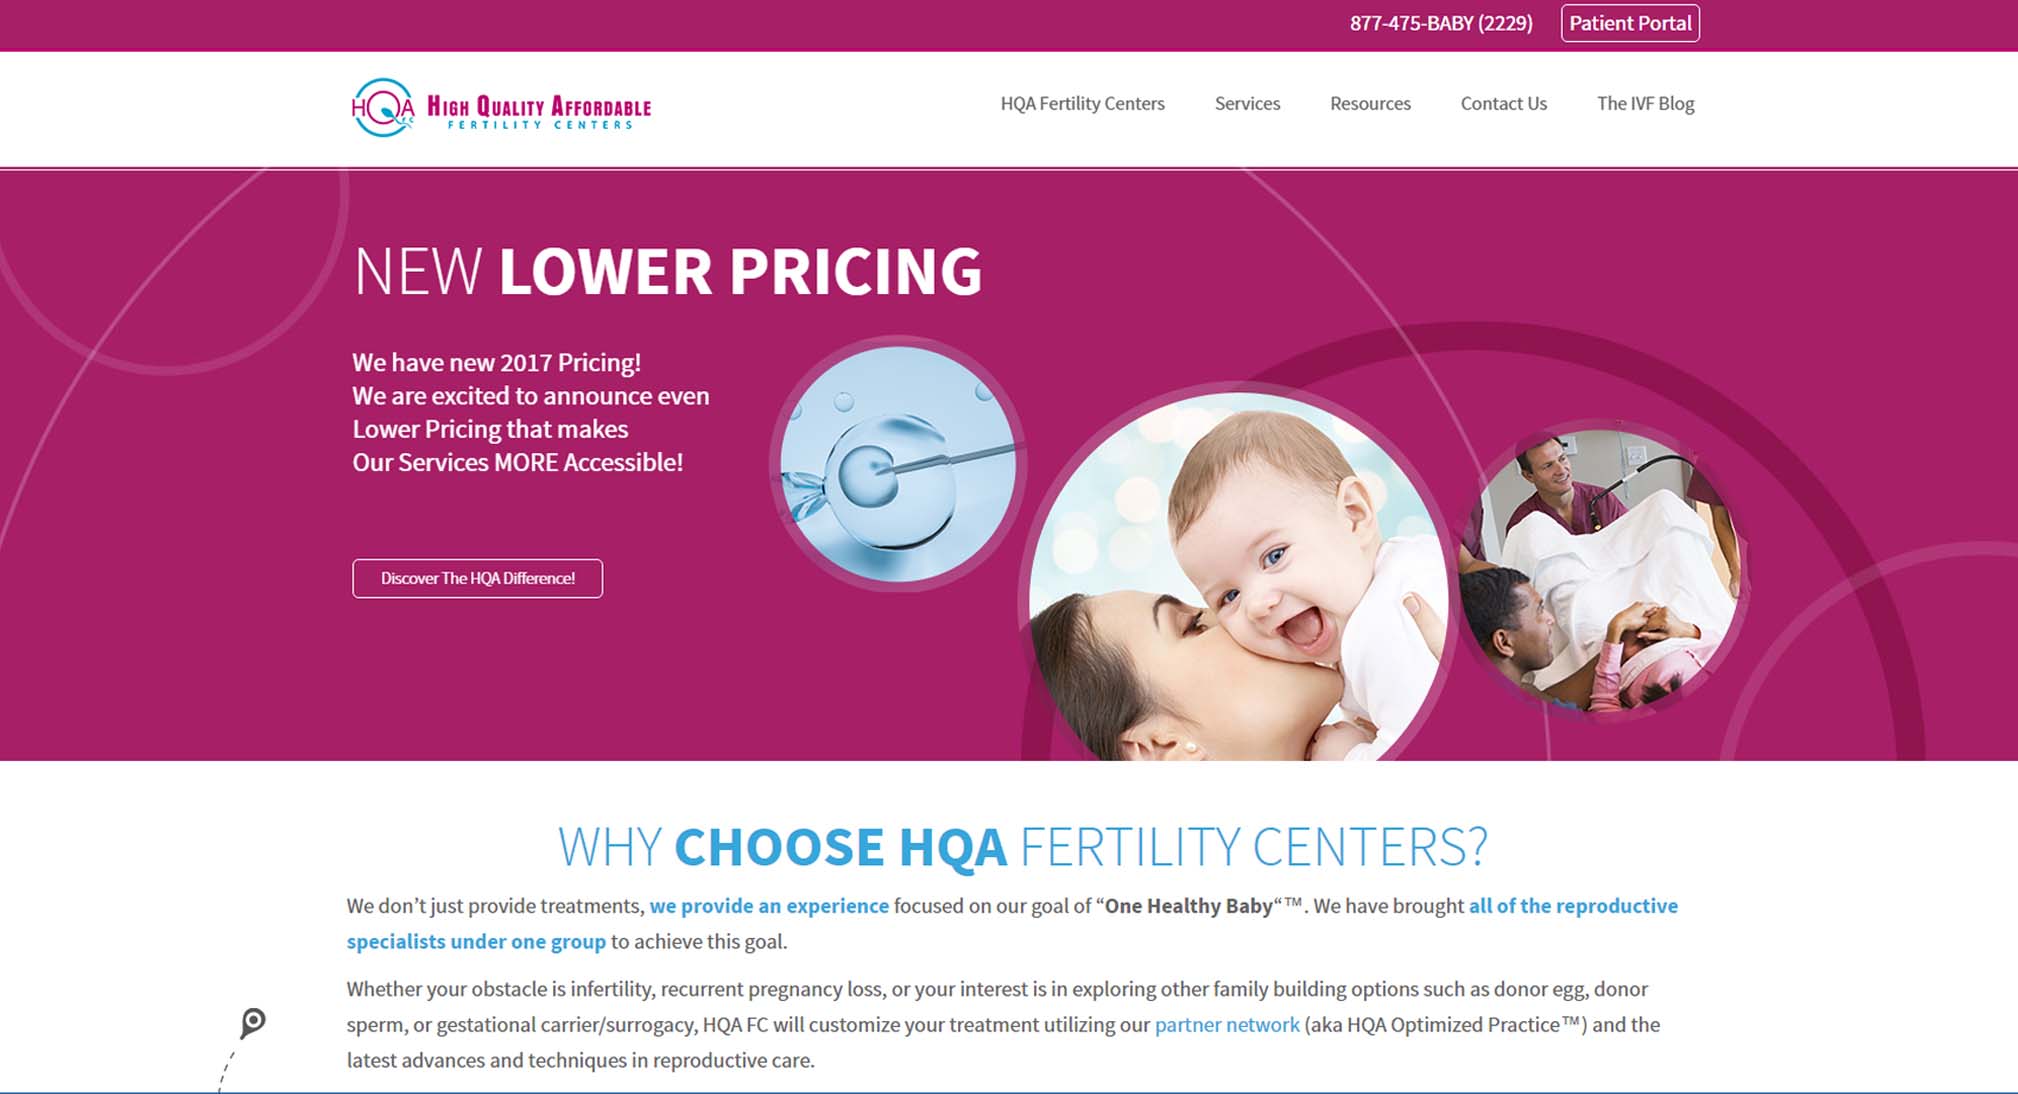 High Quality Affordable (HQA) Fertility Centers website design and development home page